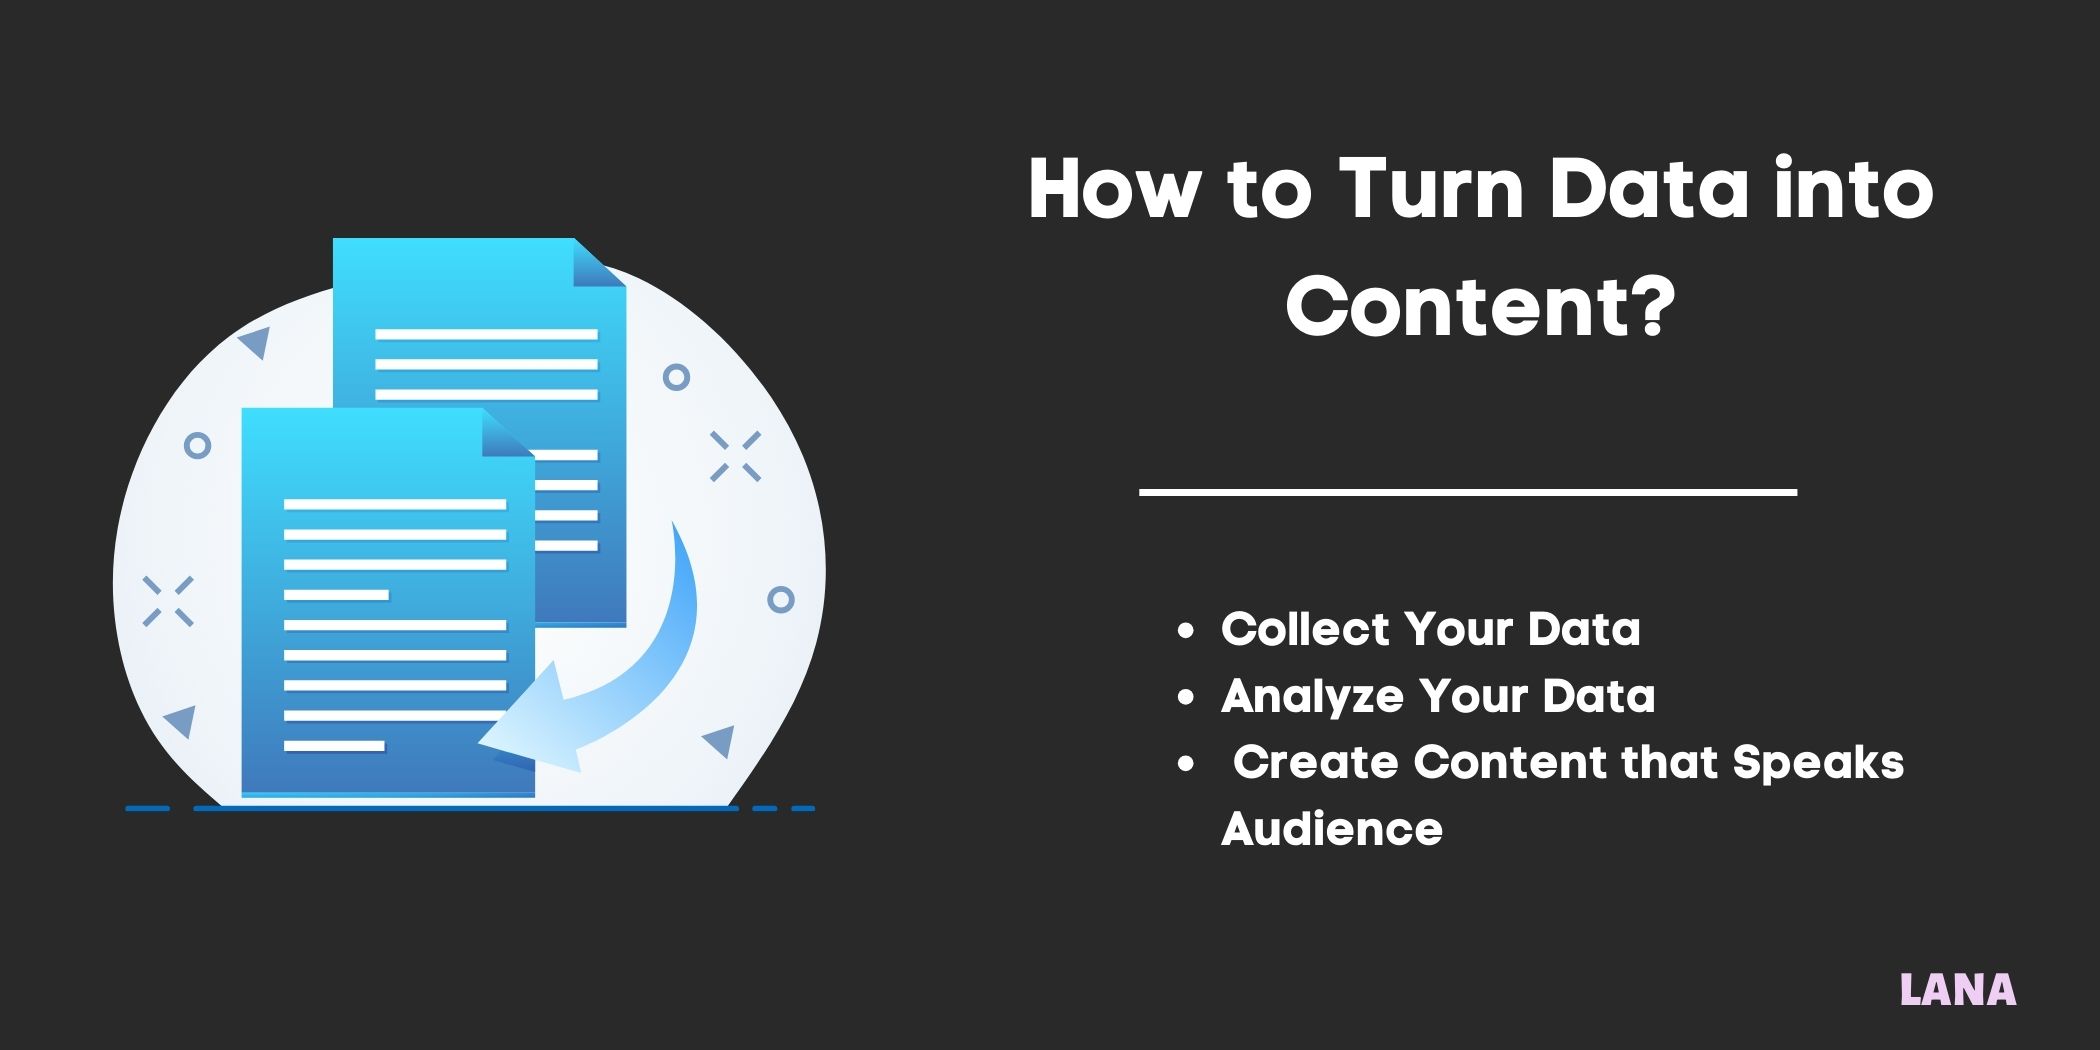 How to Turn Data into Content